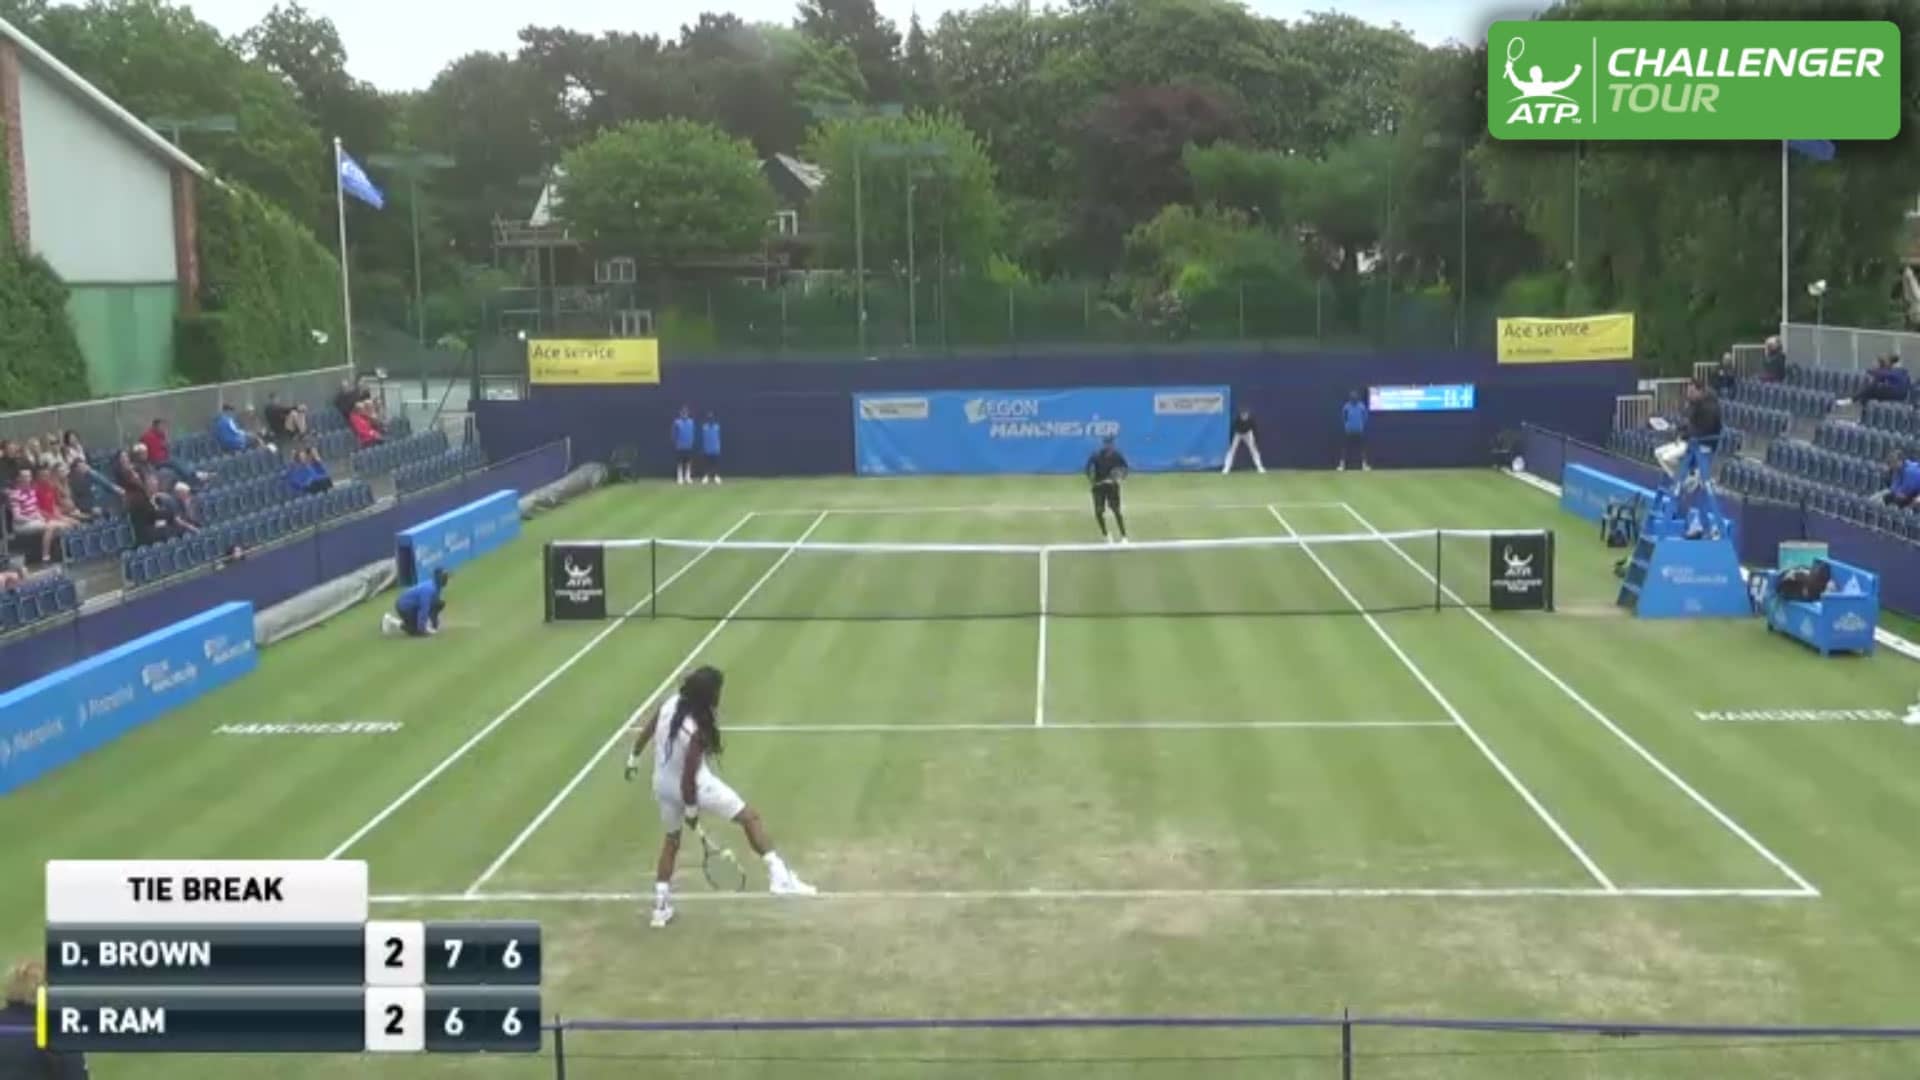 Dustin Brown takes hot shot honours once again at the ATP Challenger Tour event in Manchester.